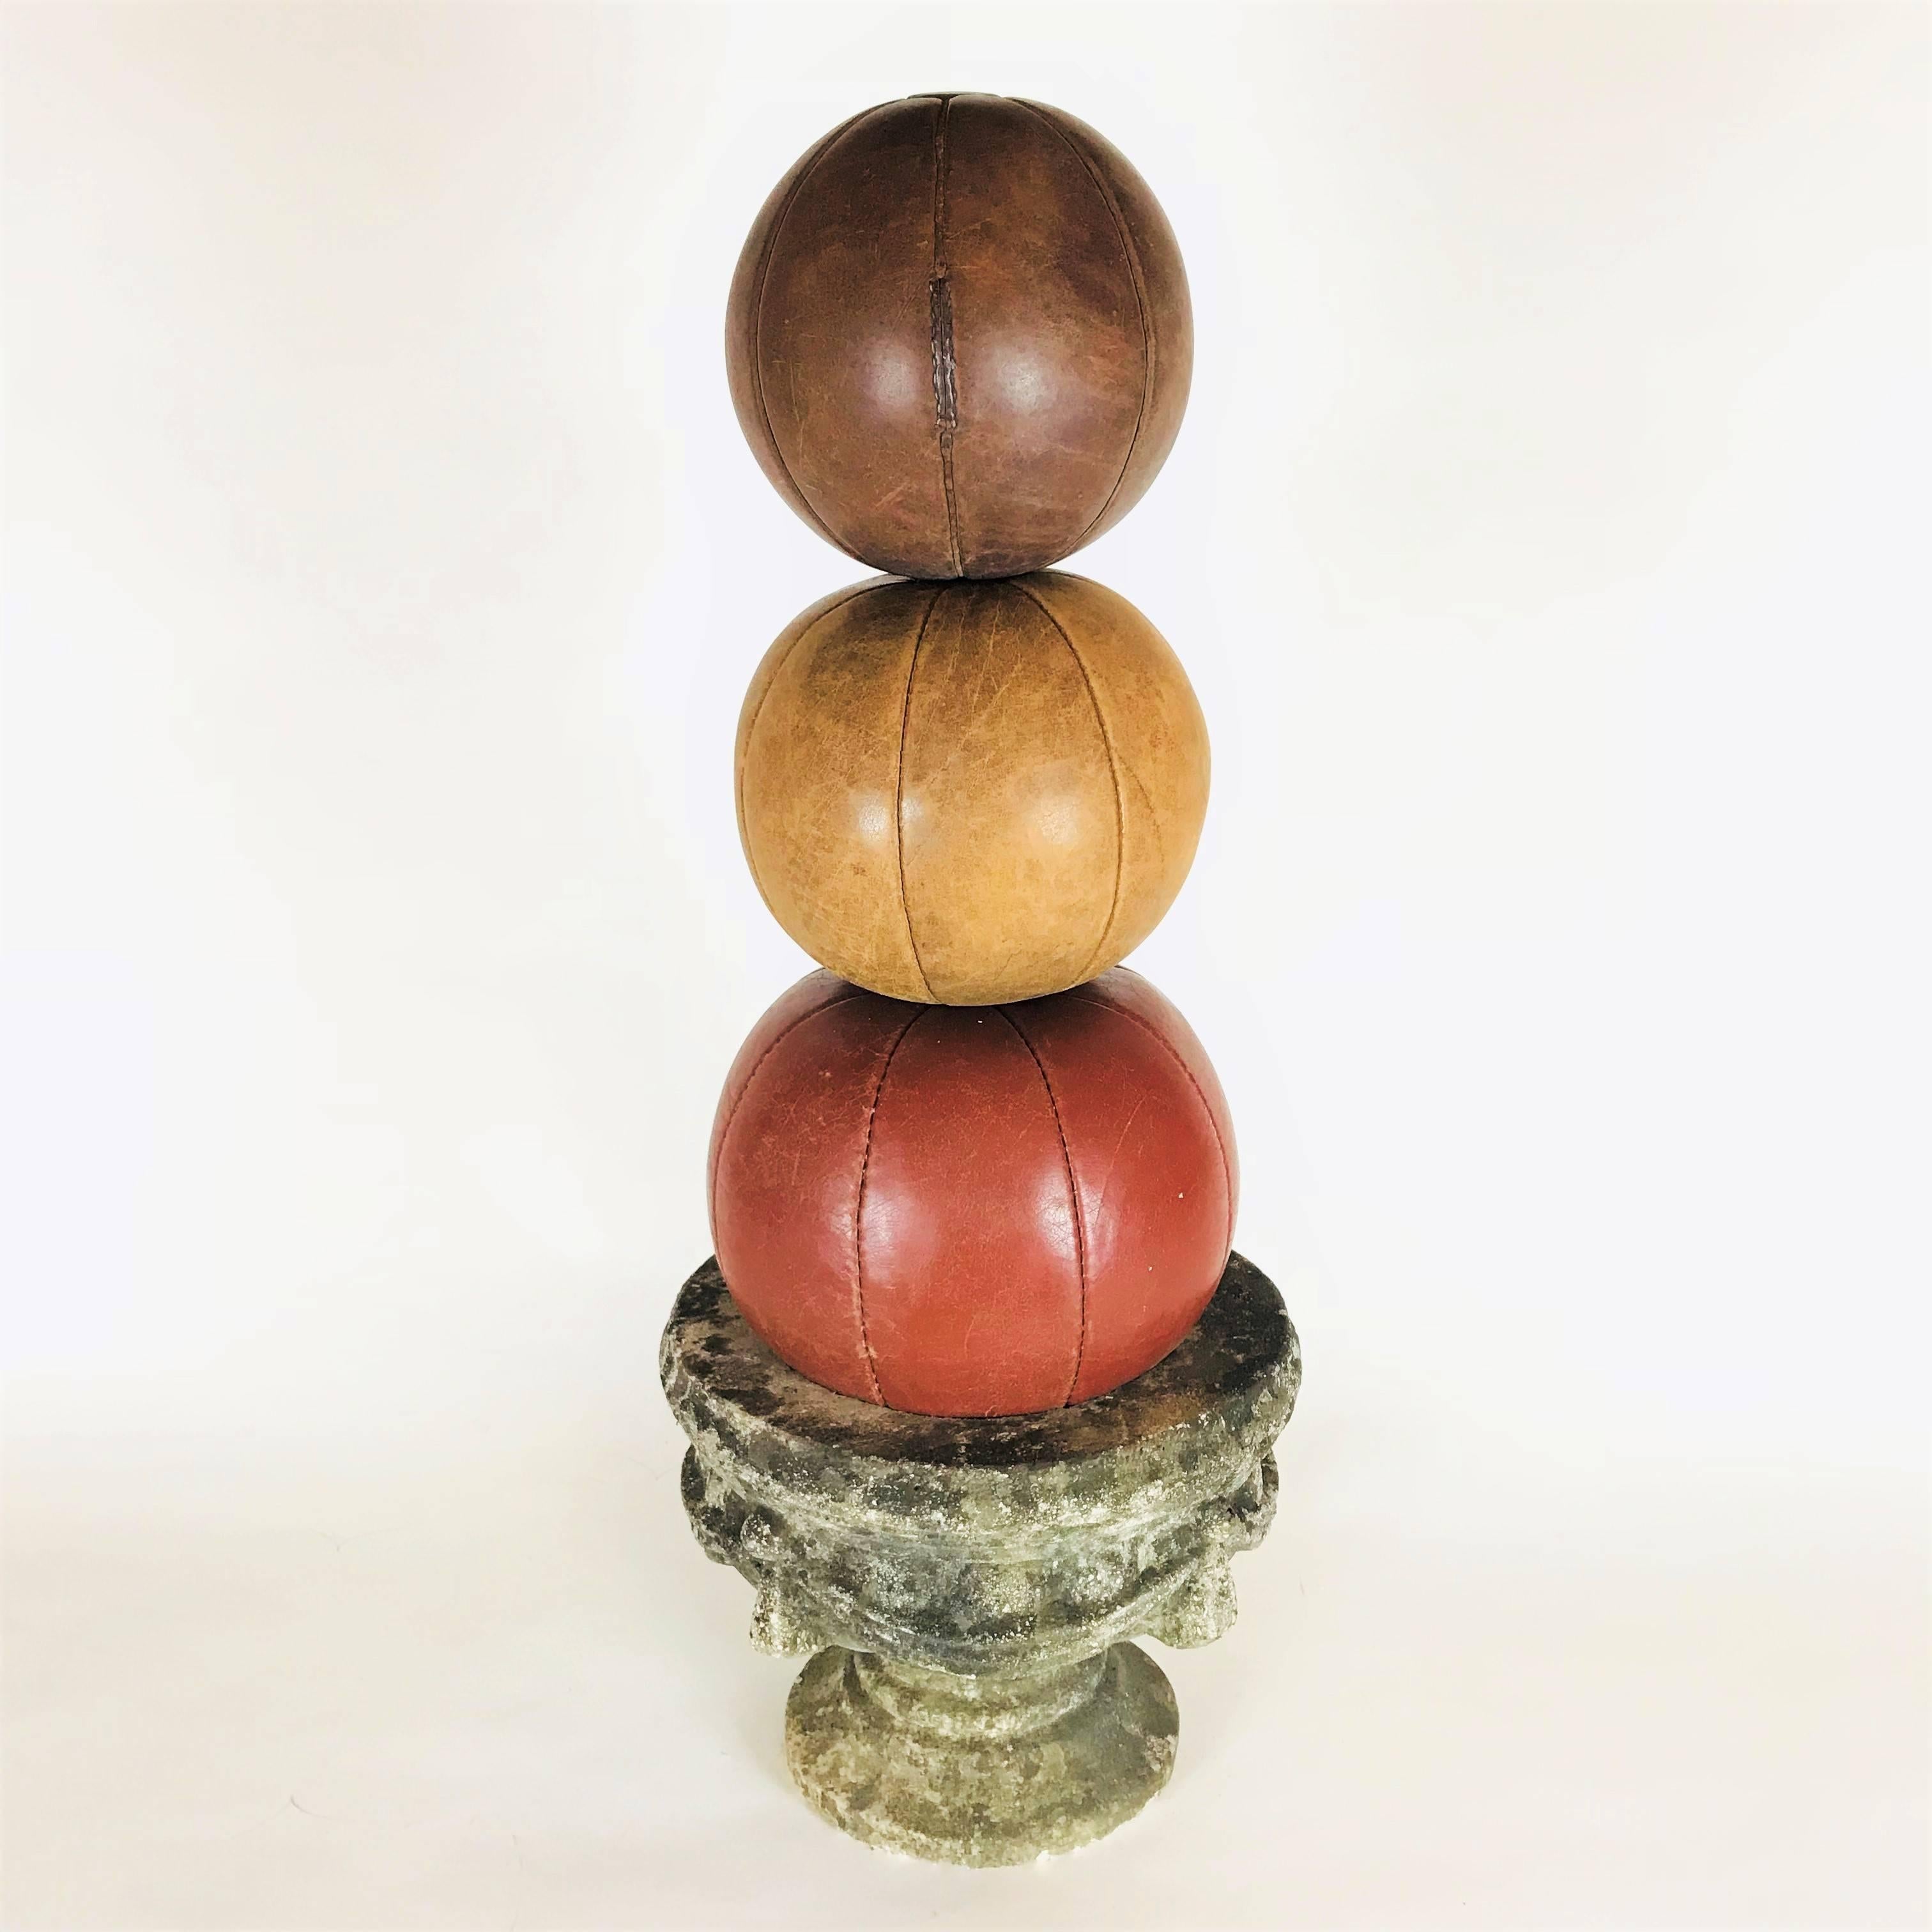 The medicine balls are part of a big collection from the 1920s-1930s, the time of the first gym enthusiasts in Europe. The balls are handmade, in a very good condition with nice patina and an intense color. 

Diameter: 23, 24, 28 cm / 9, 9.5, 11 in.